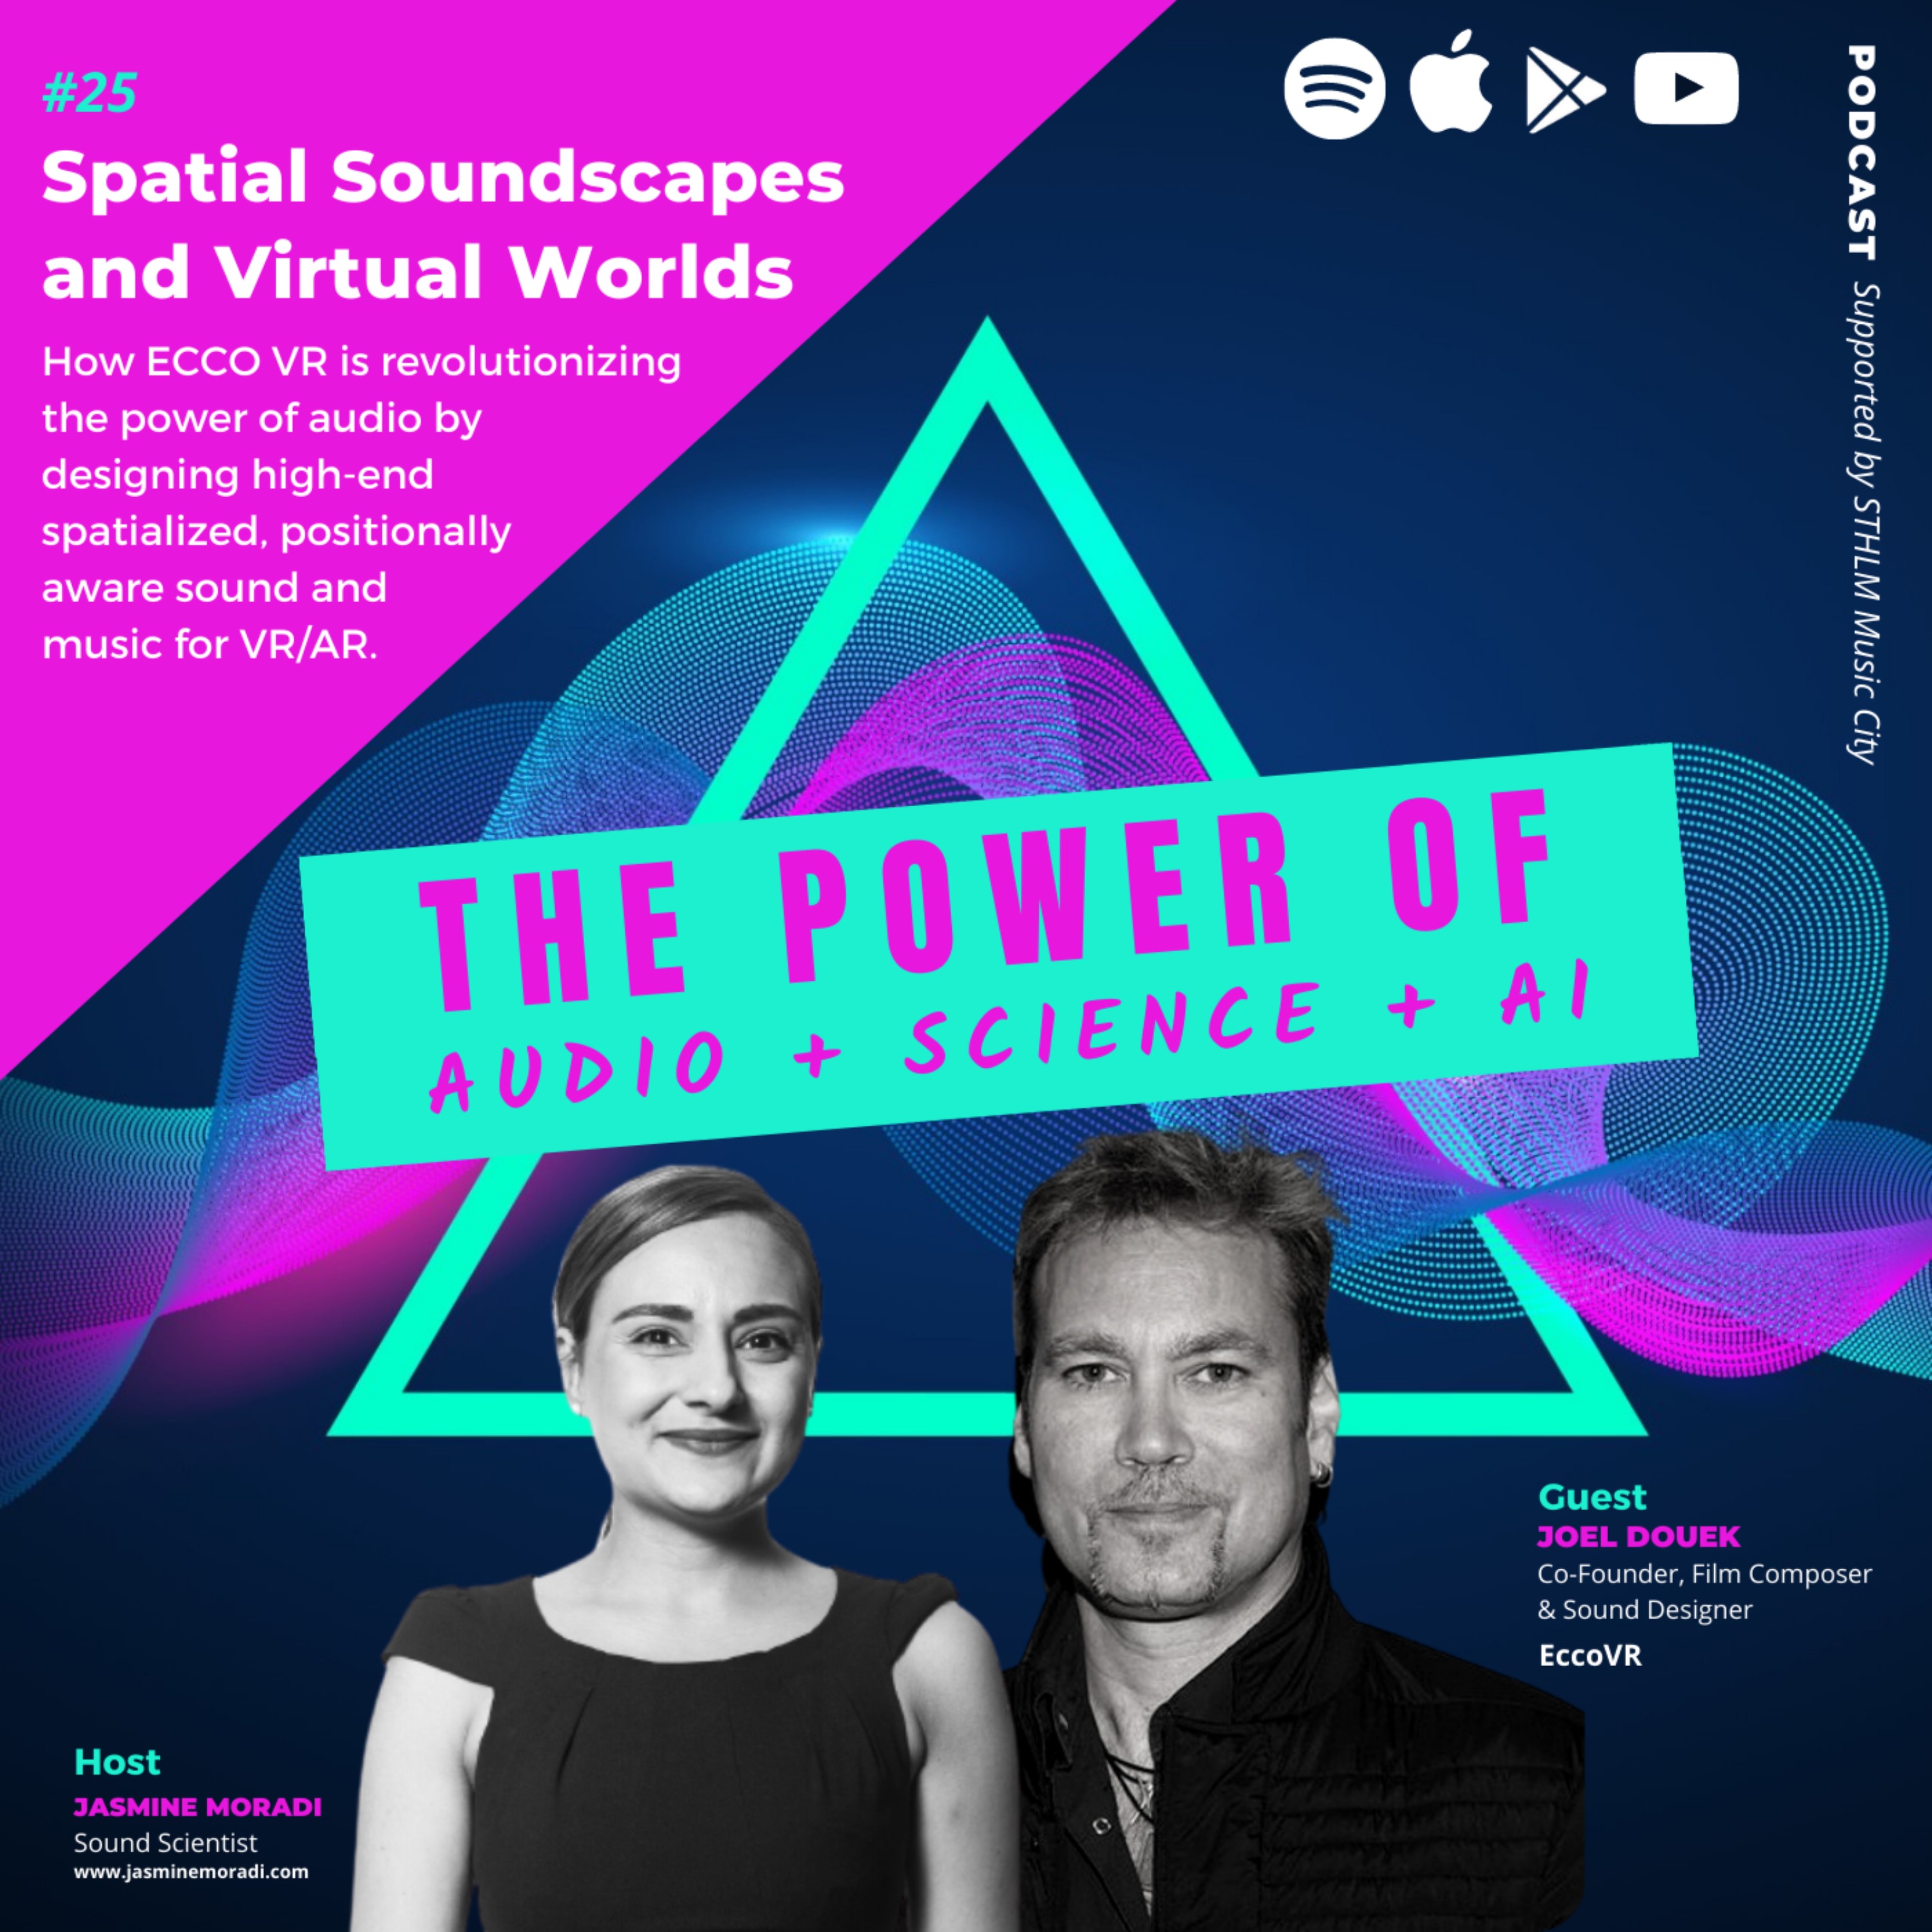 cover art for 25.Spatial Soundscapes and Virtual Worlds | Joel Douek, Co-Founder, Film Composer & Sound Designer at EccoVR